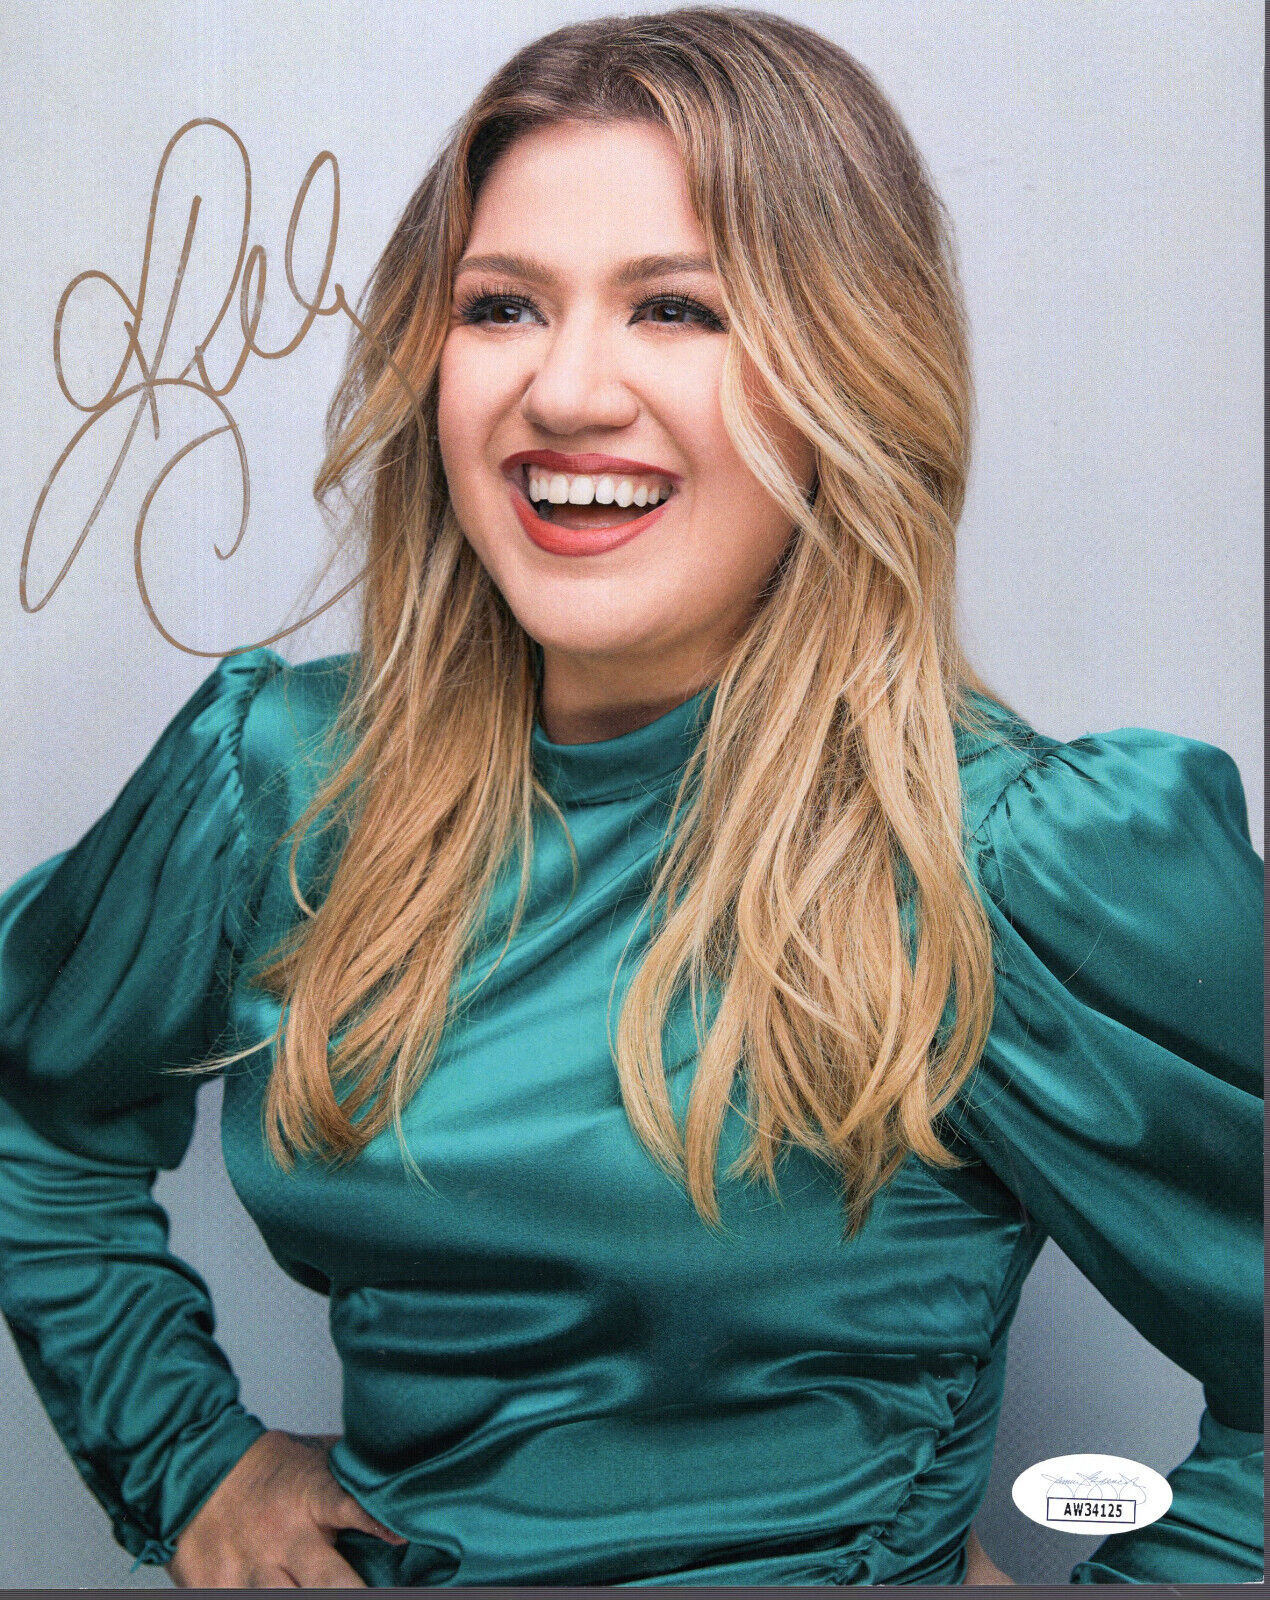 KELLY CLARKSON HAND SIGNED 8x10 COLOR PHOTO         GORGEOUS SMILE         JSA